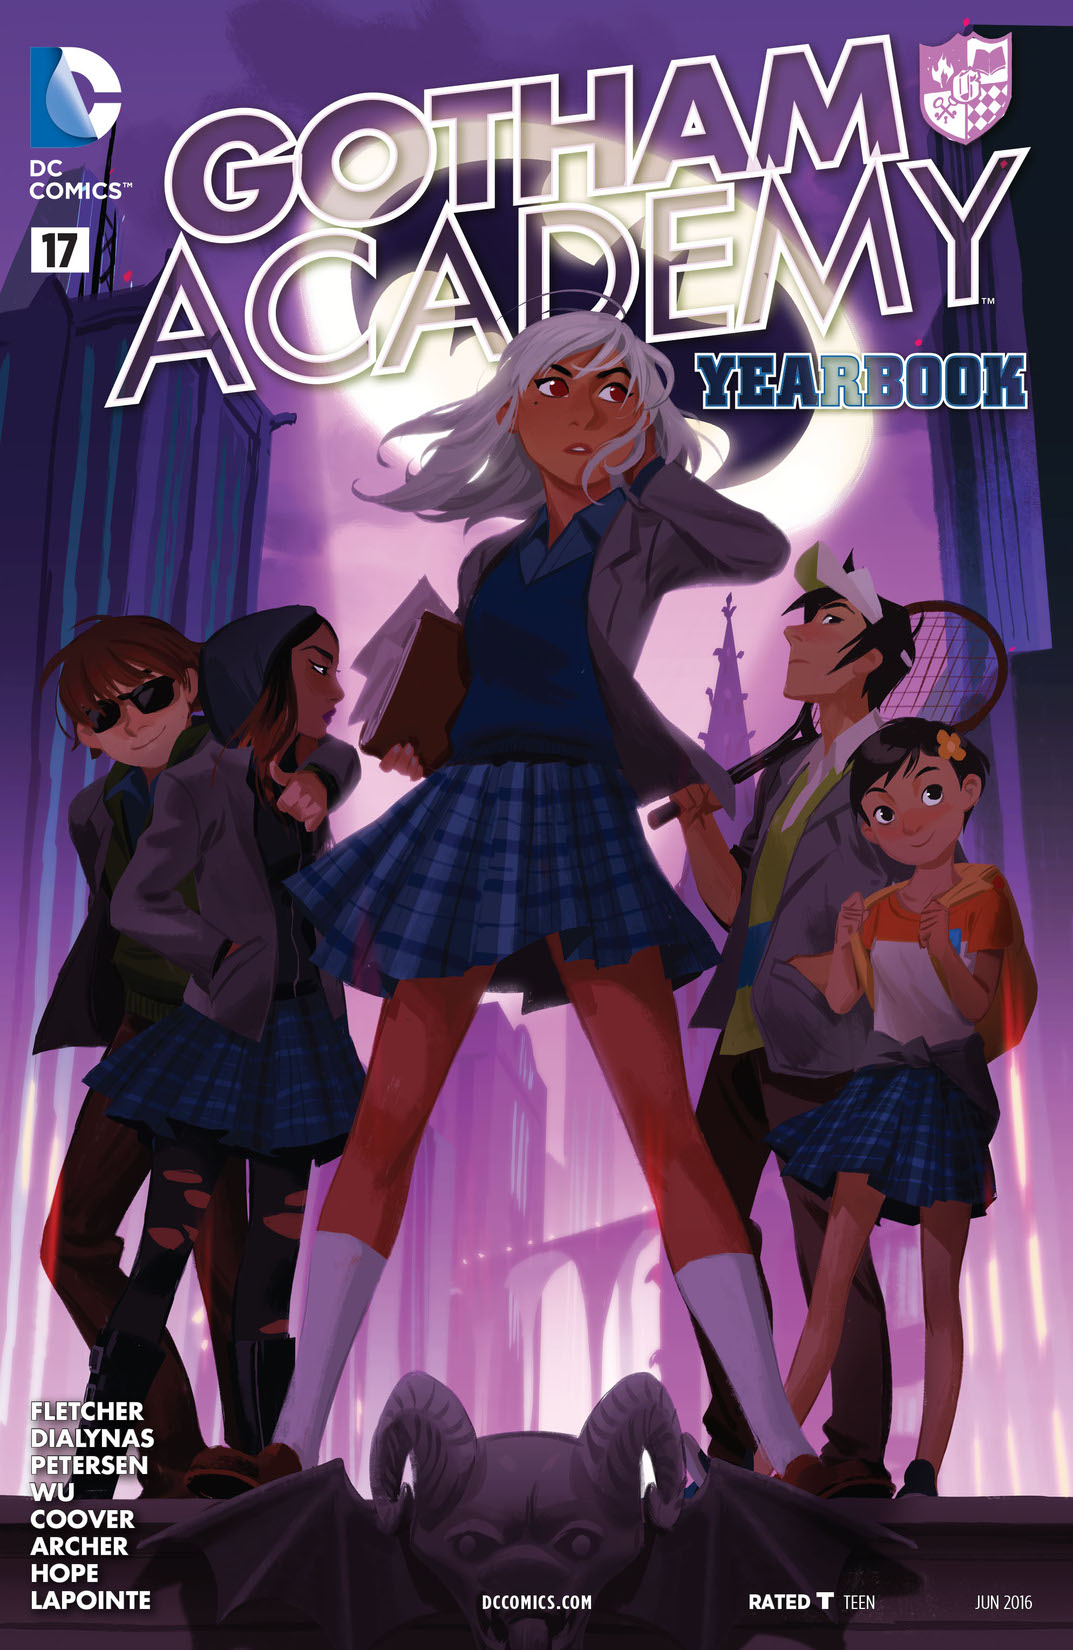 Gotham Academy #17 preview images